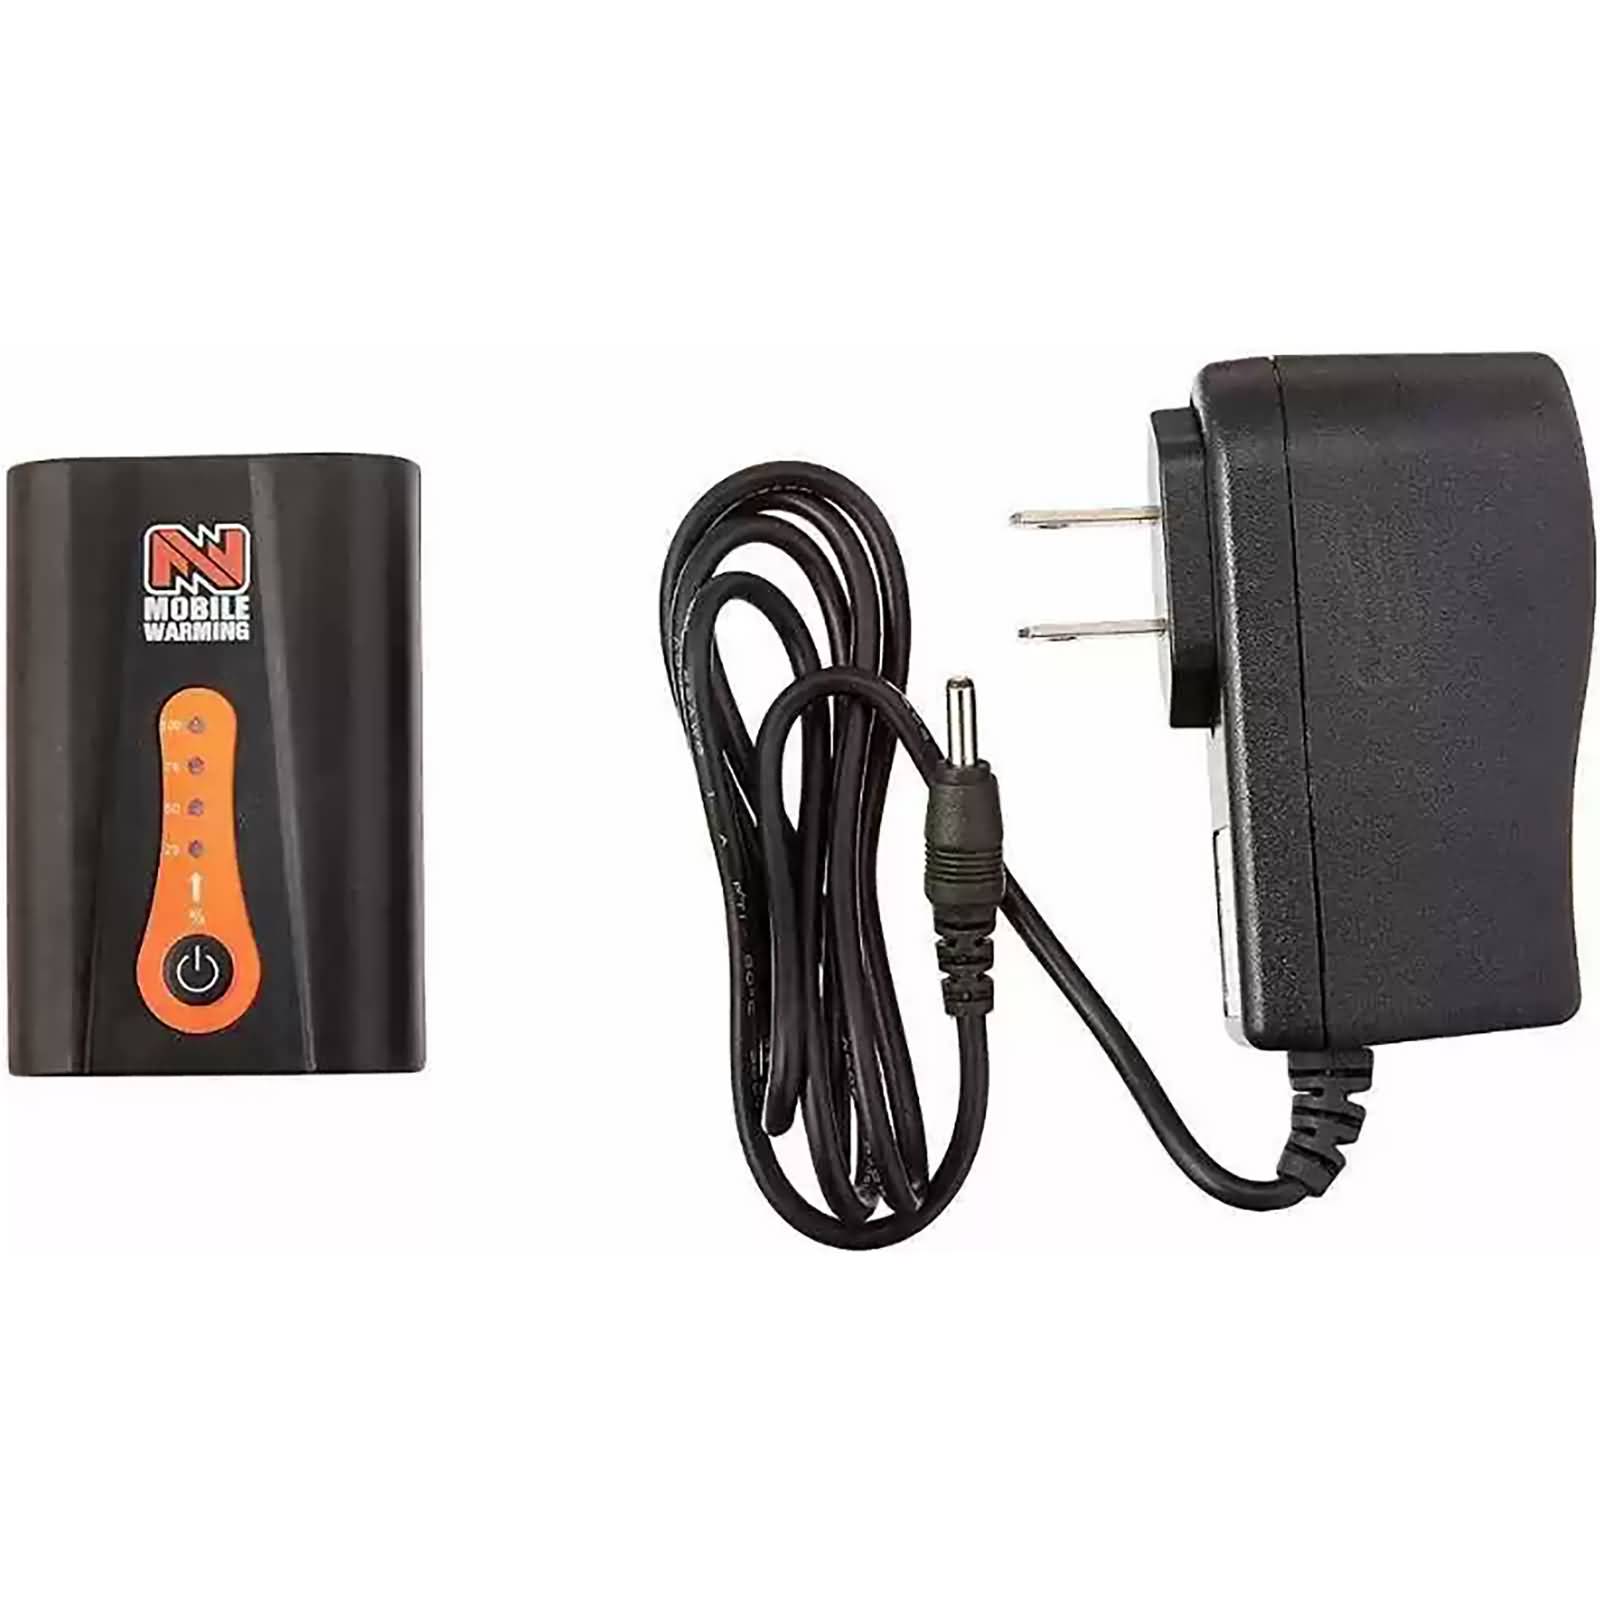 Mobile Warming Battery & Charger Pack Battery Charger Accessories-7009